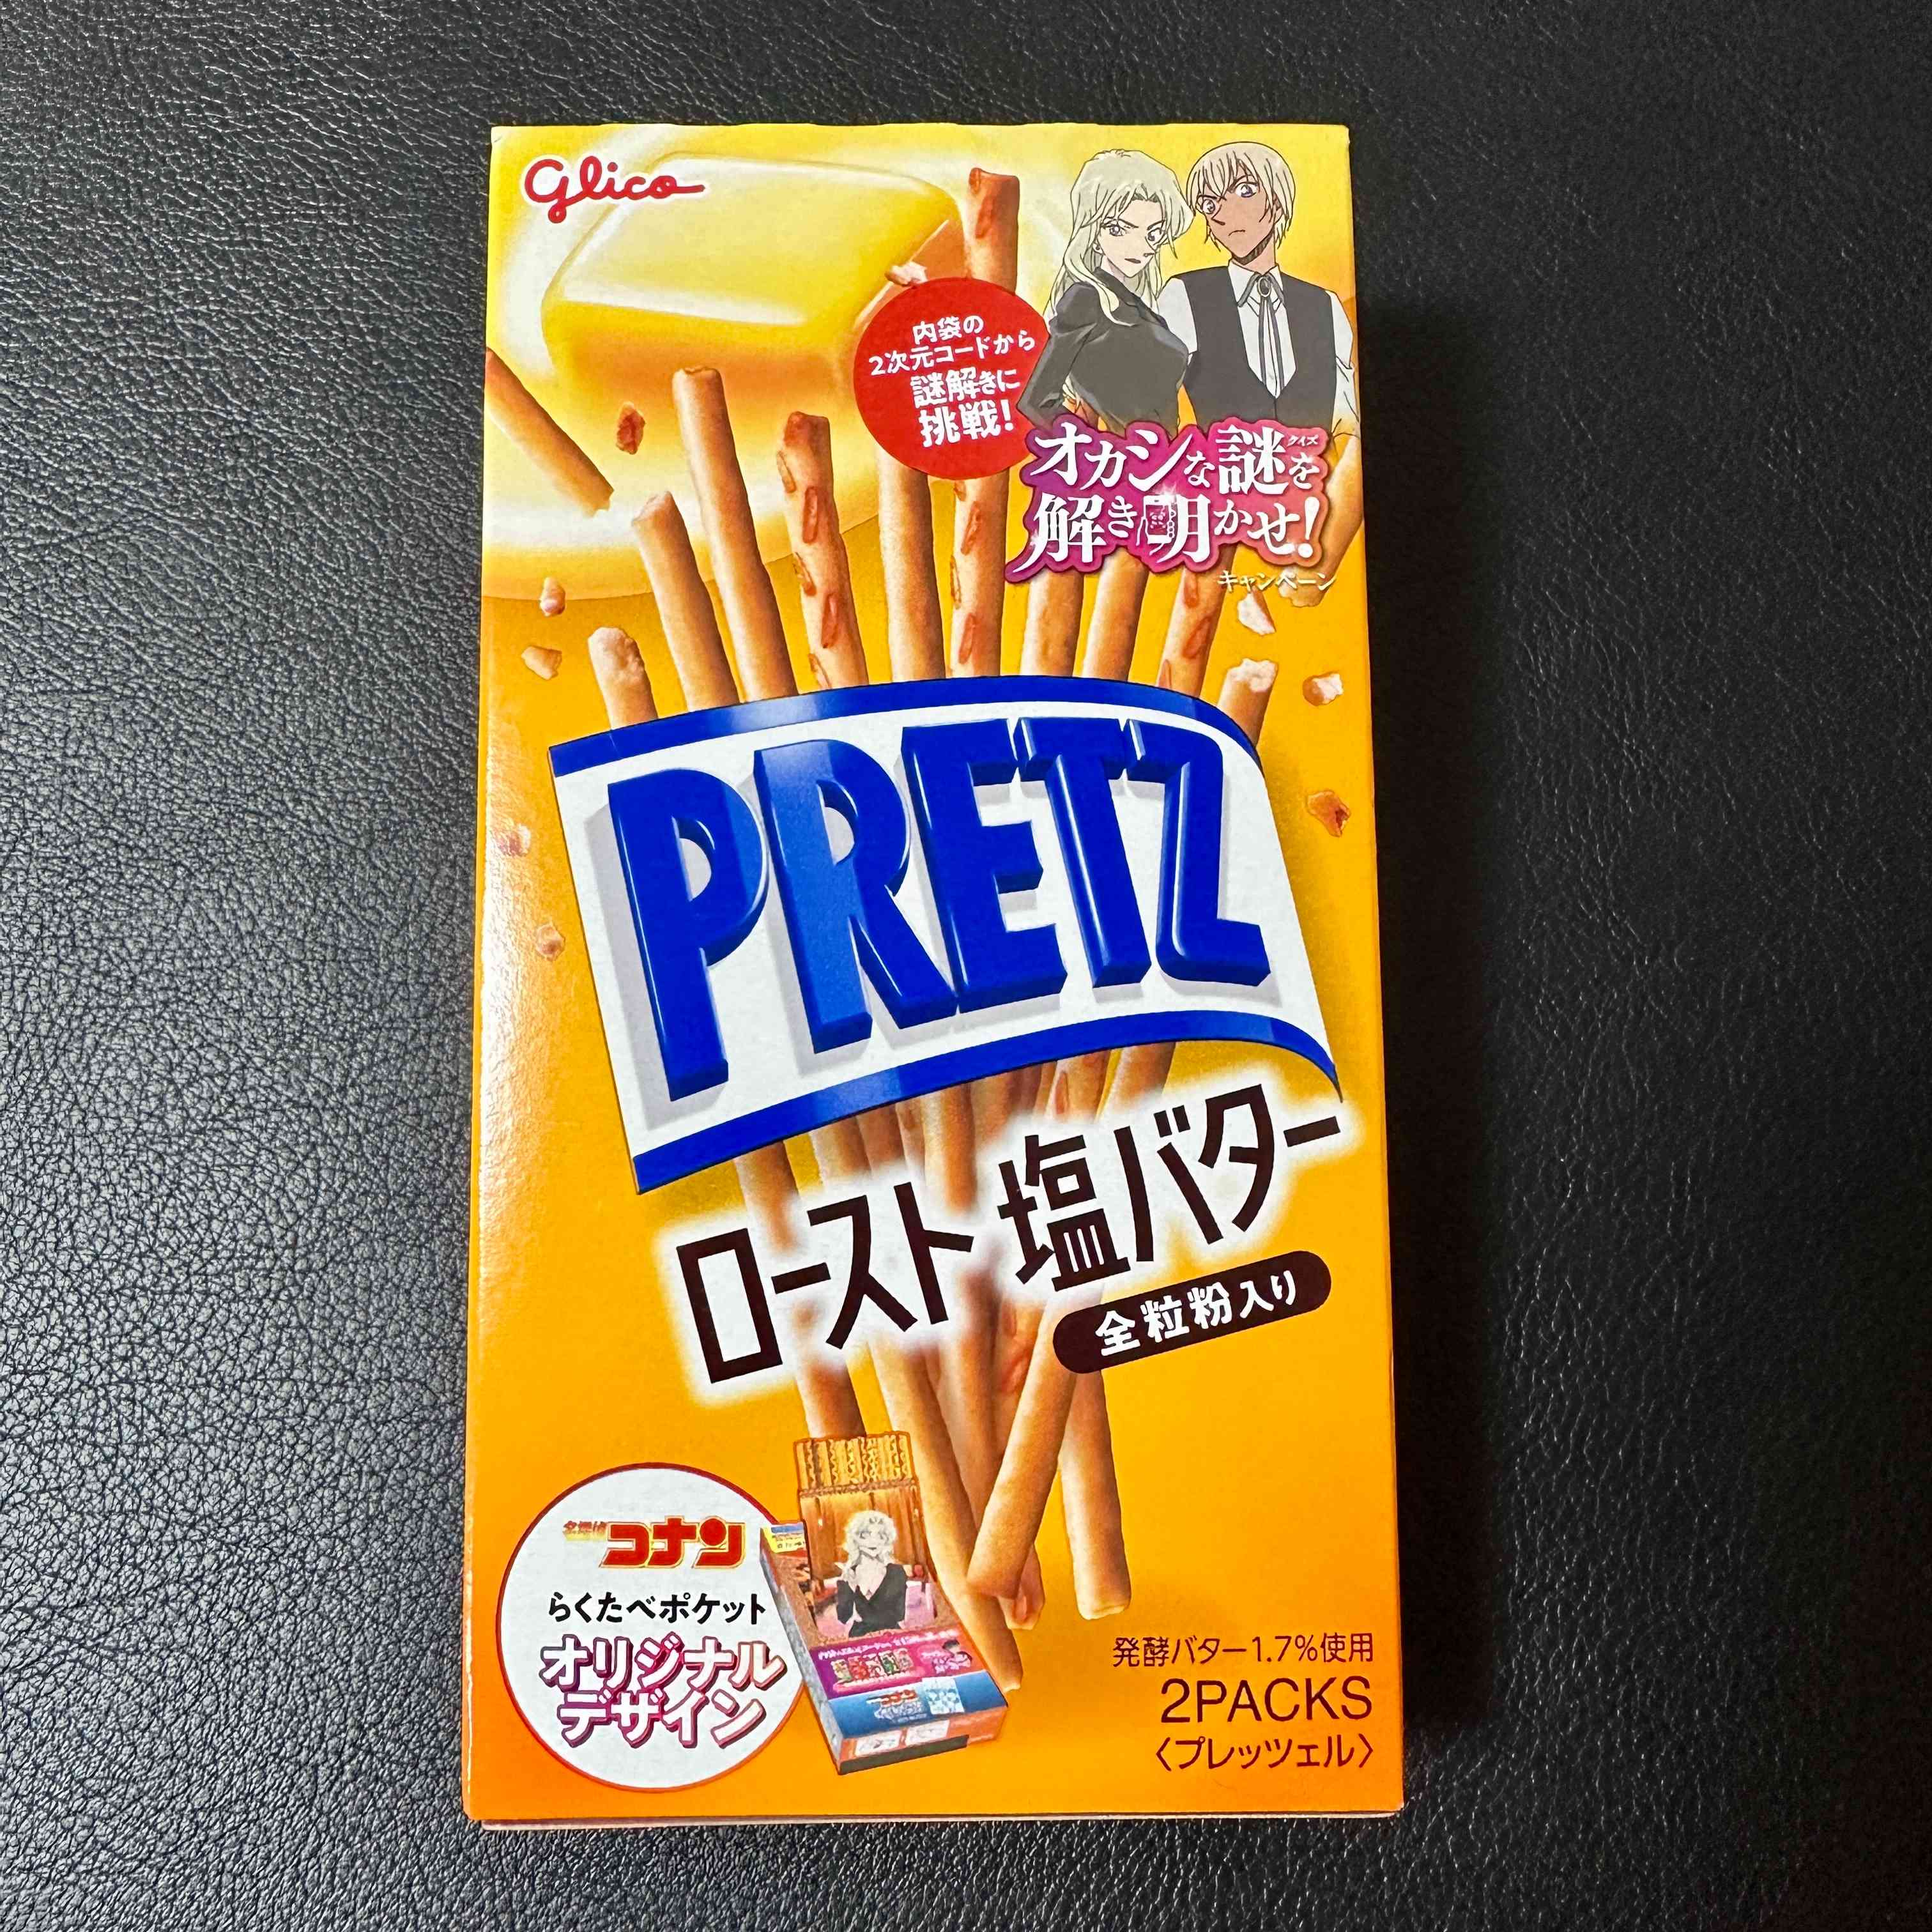 【glico】PRETZ Roasted Salted Butter　120pieces（1case）　7440ｇ